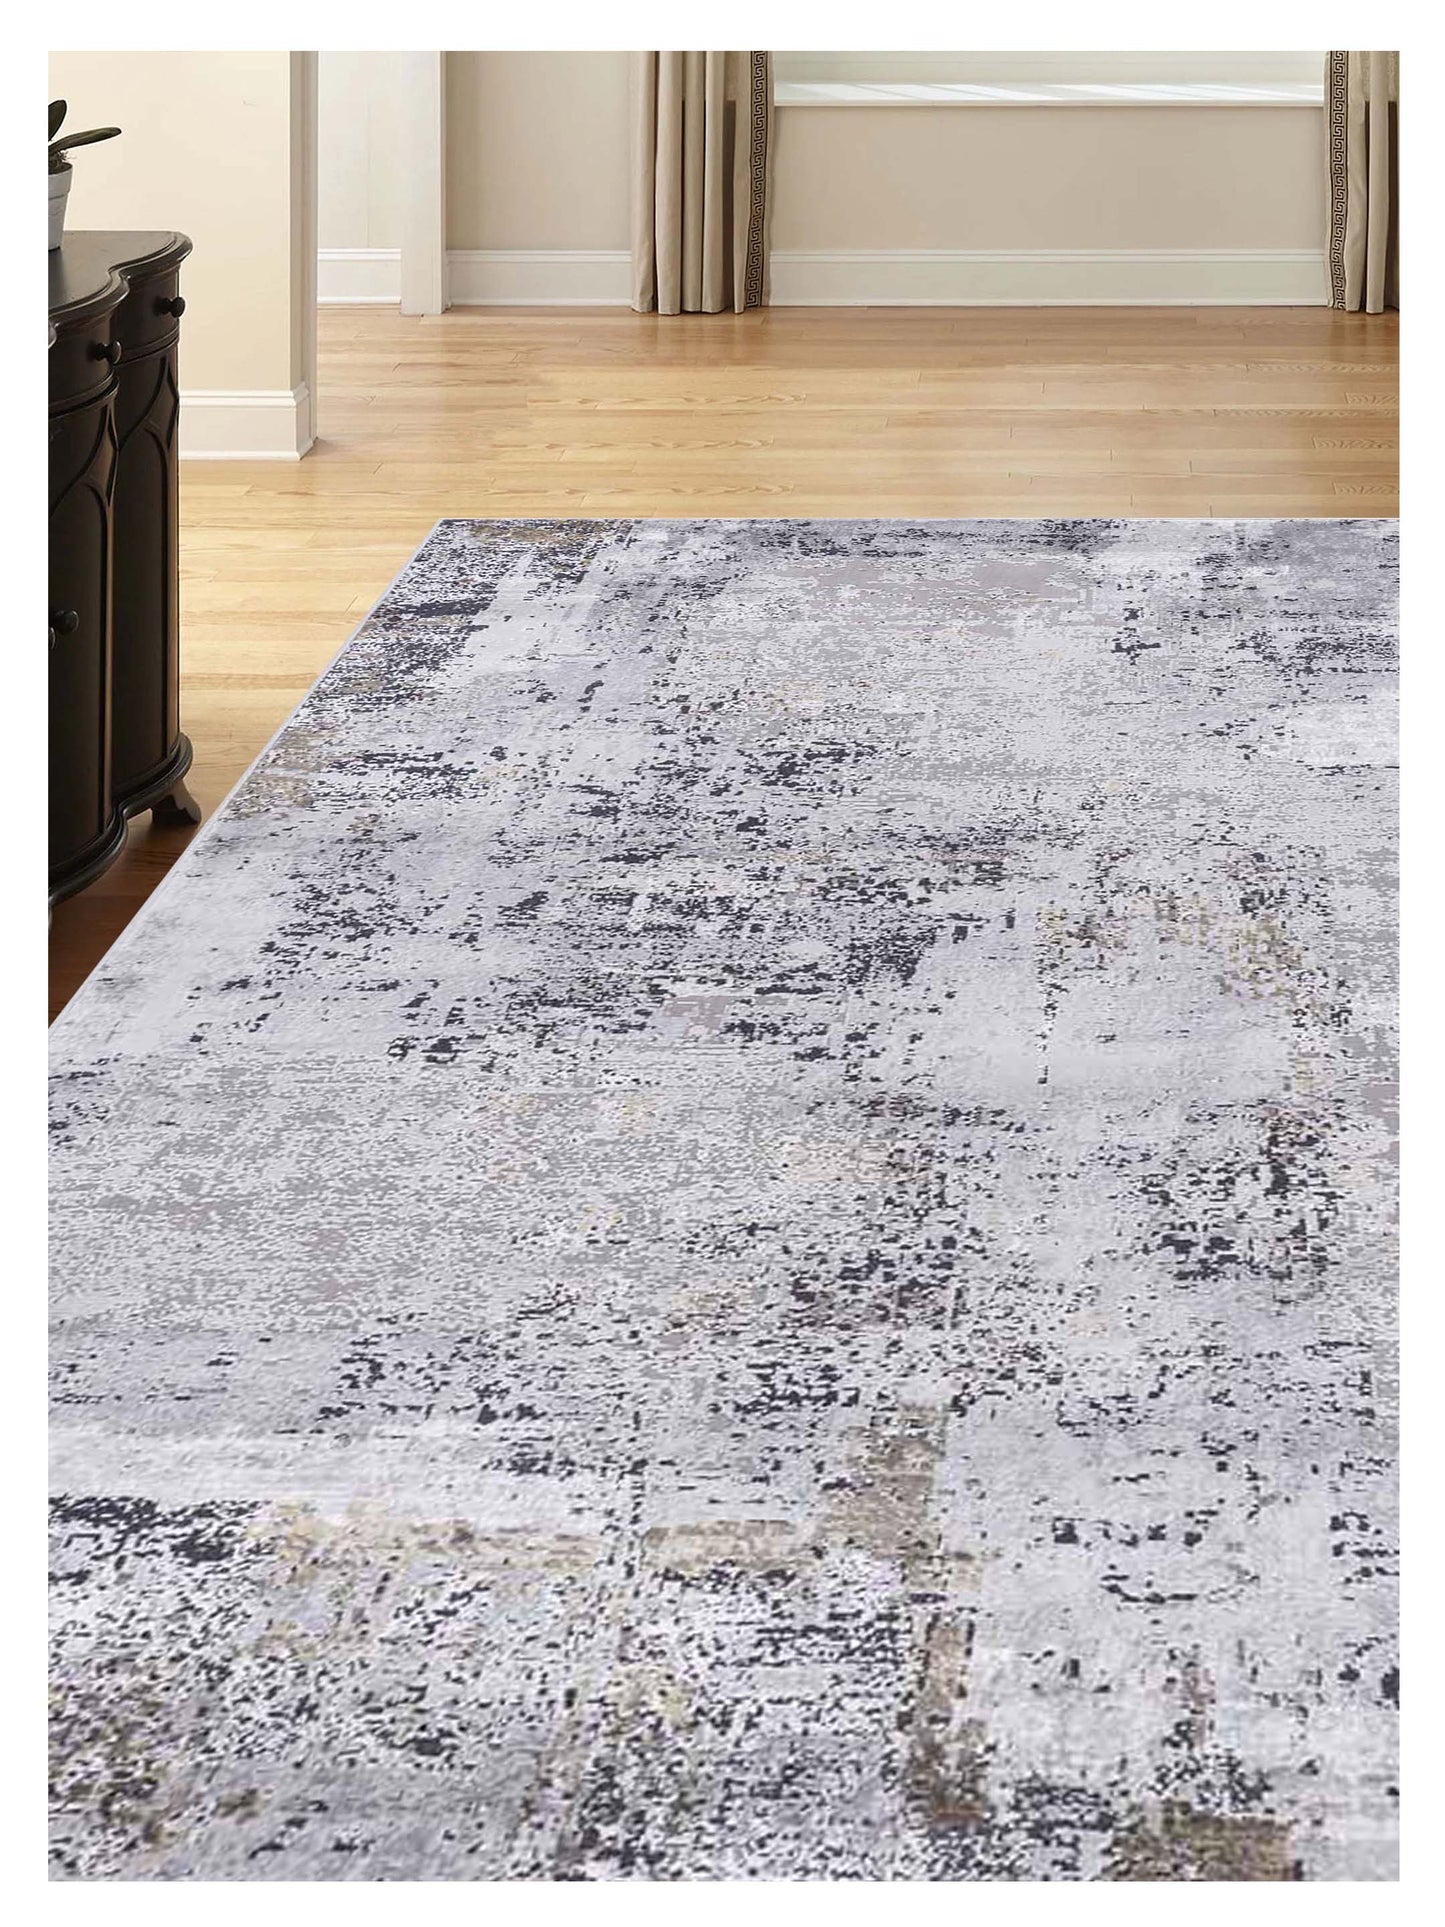 Limited Courteney CY-255 GRAY GOLD Transitional Machinemade Rug